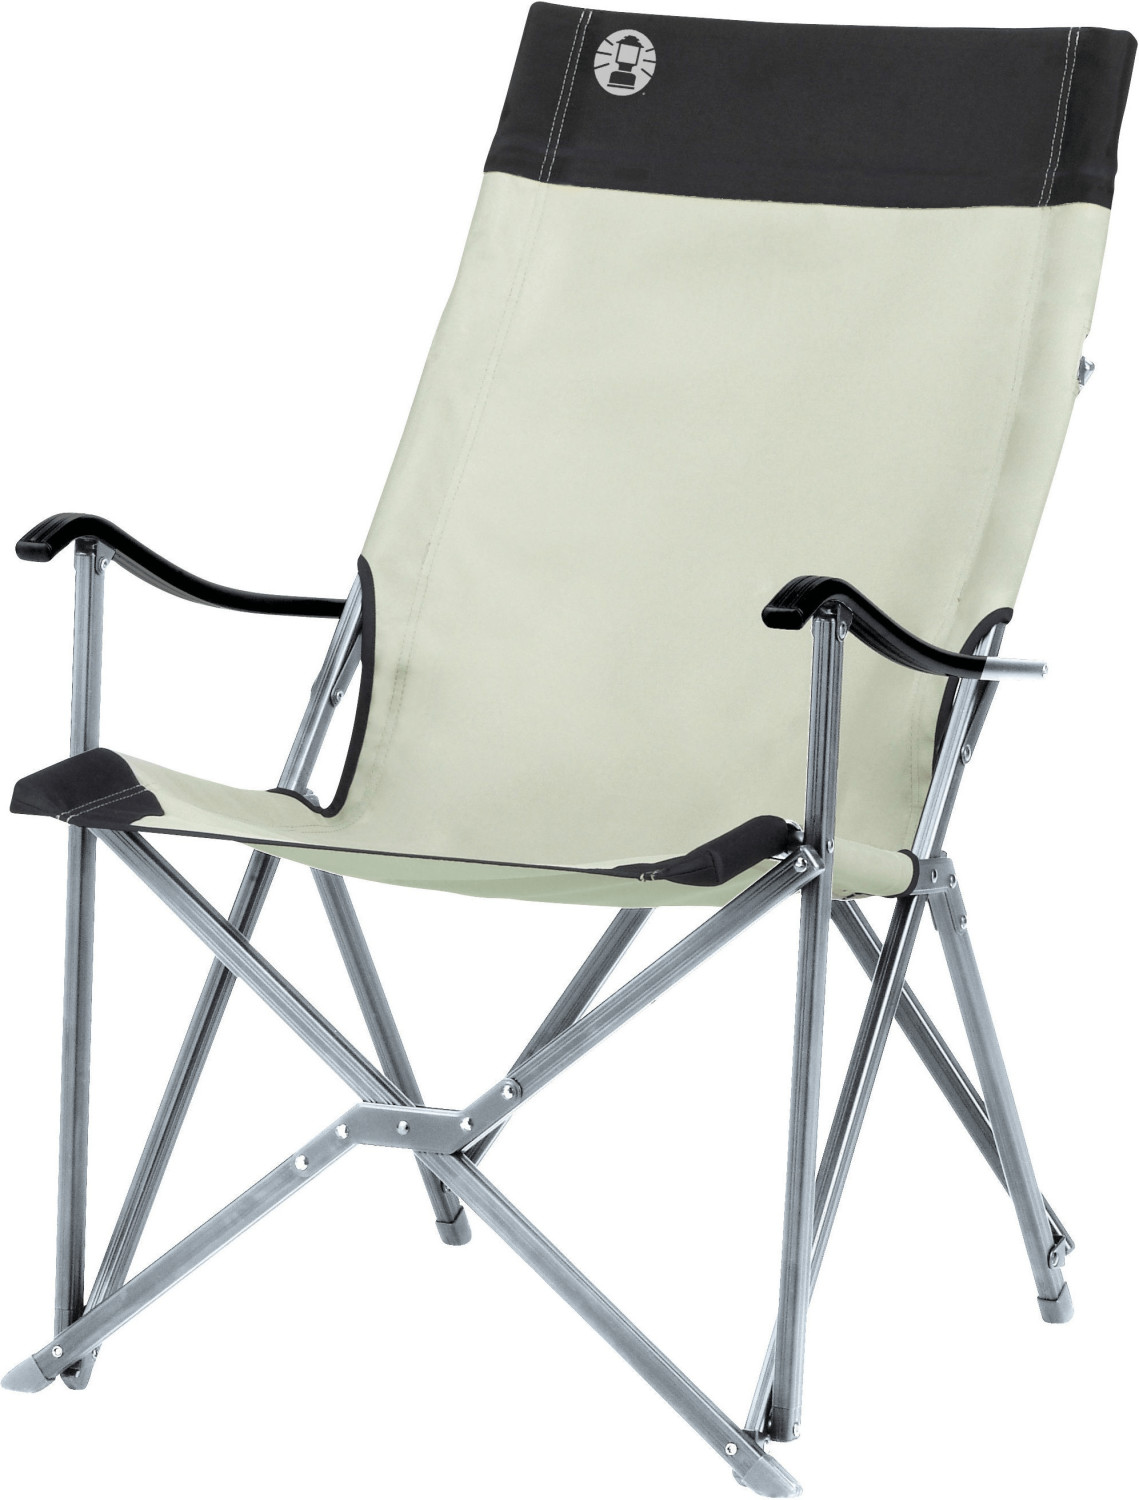 Buy Coleman Sling Chair khaki from £66.16 (Today) – Best Deals on ...